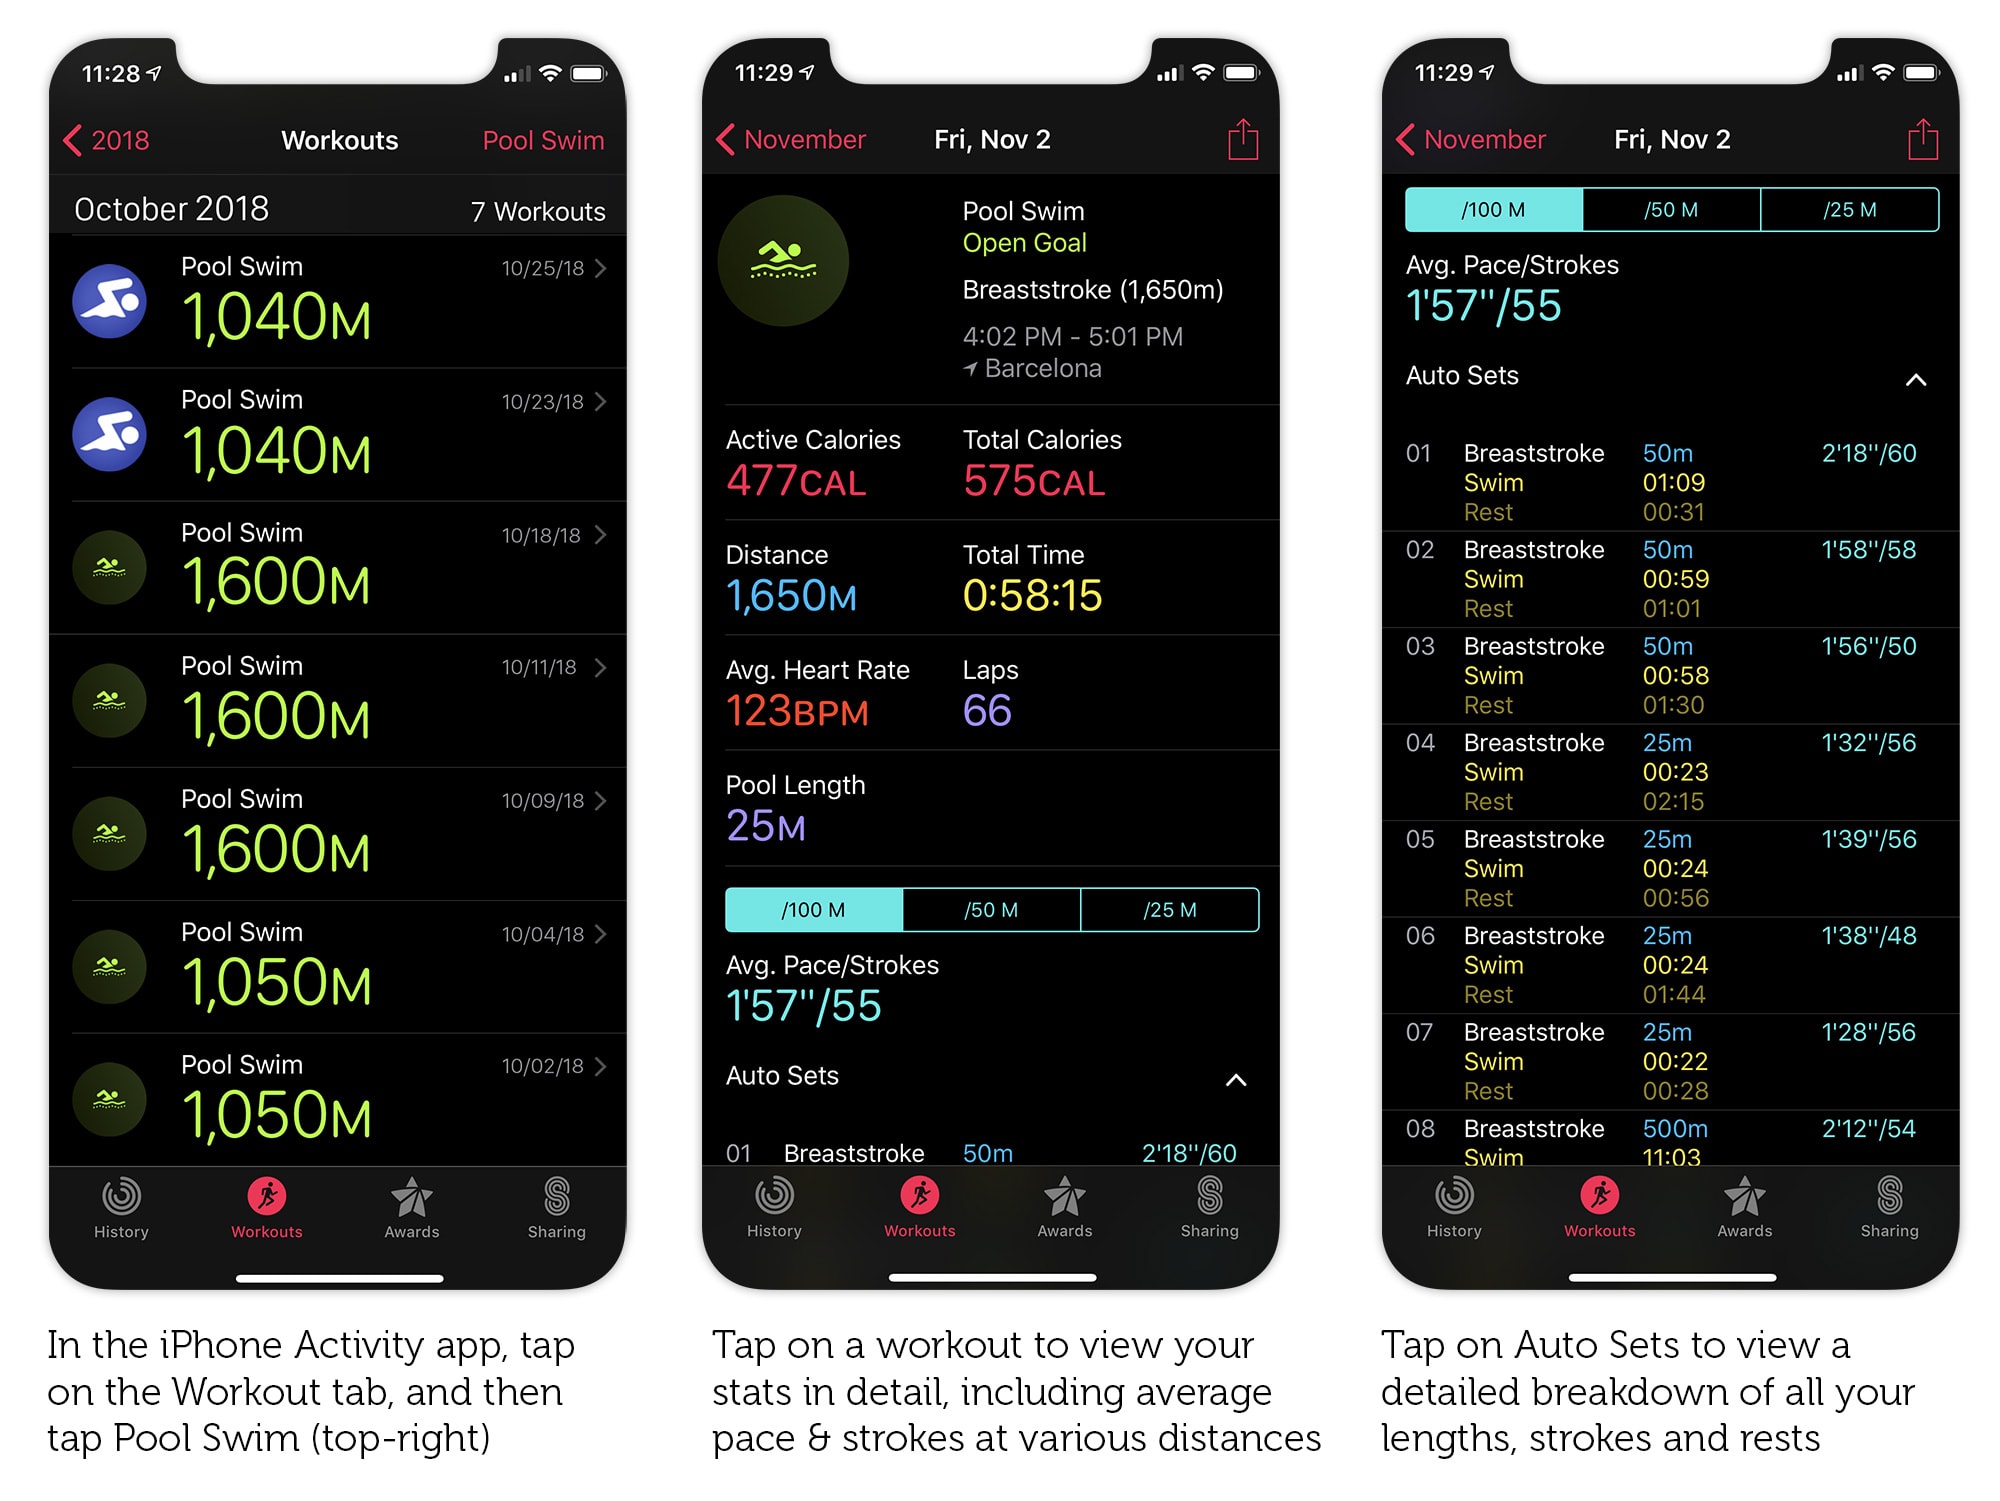 Get a detailed summary of your swimming workout in the Activity app.